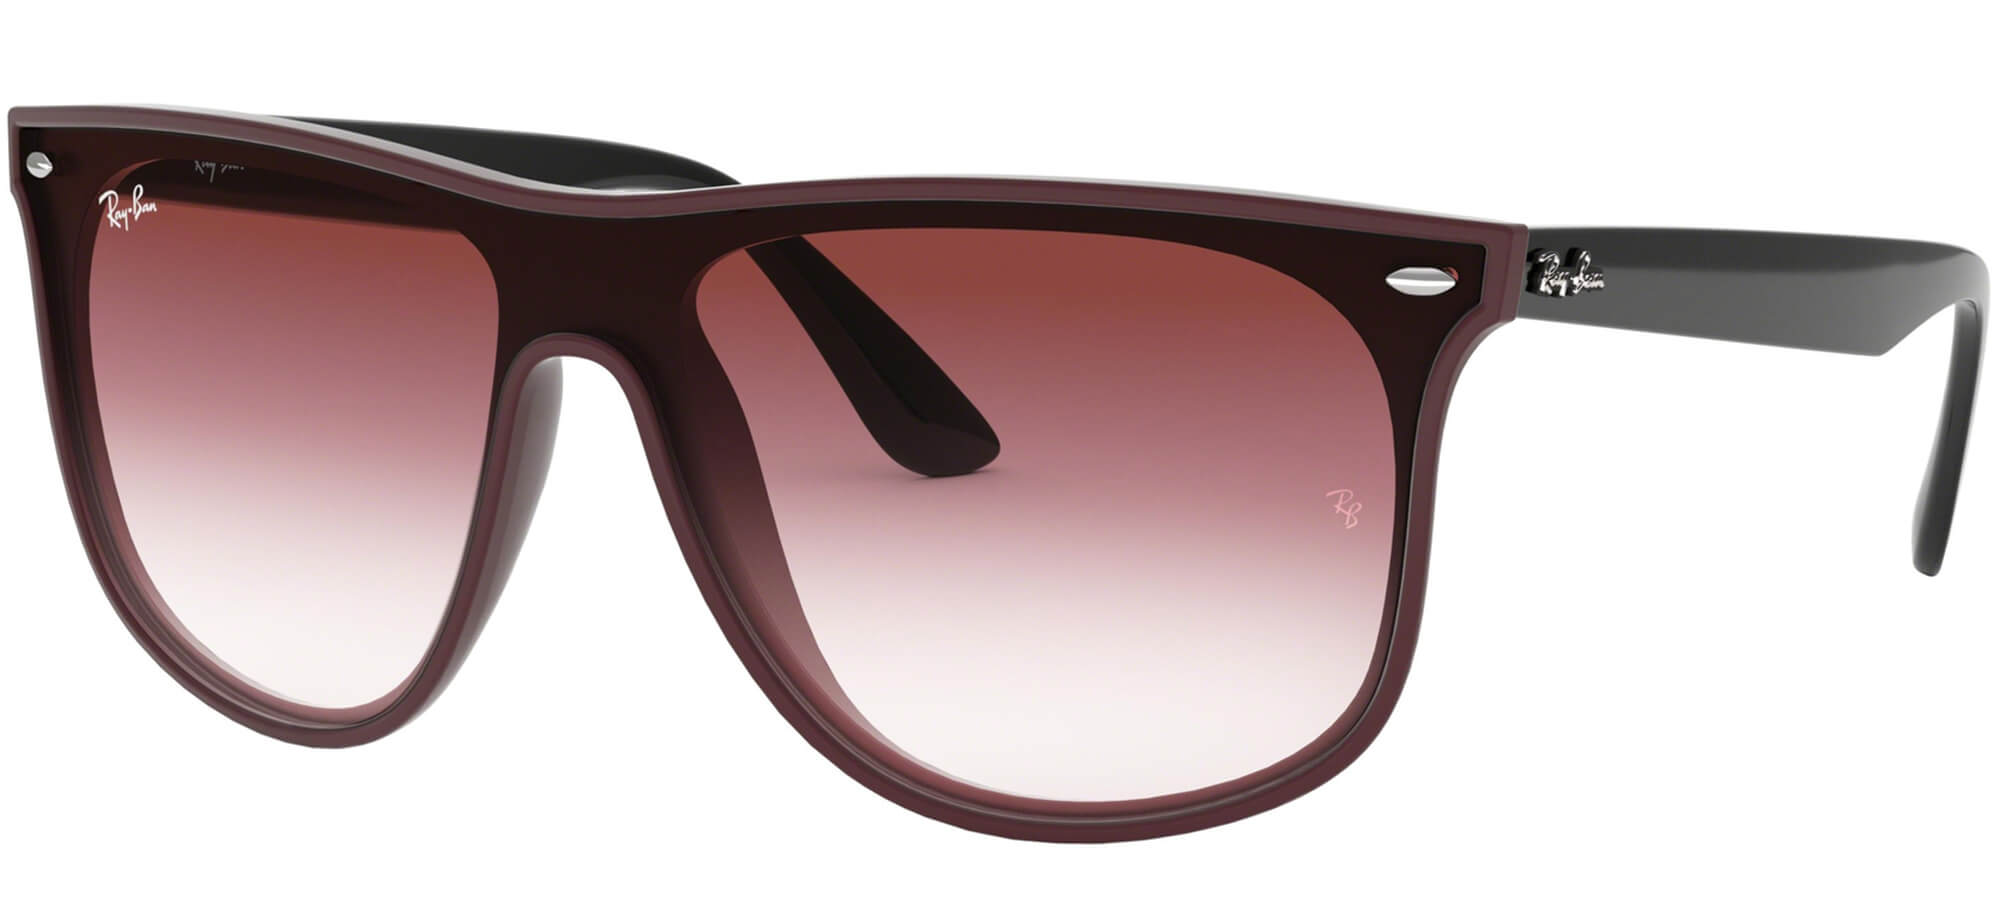 Ray-BanBLAZE RB 4447NBurgundy/red Shaded (6418/0T)